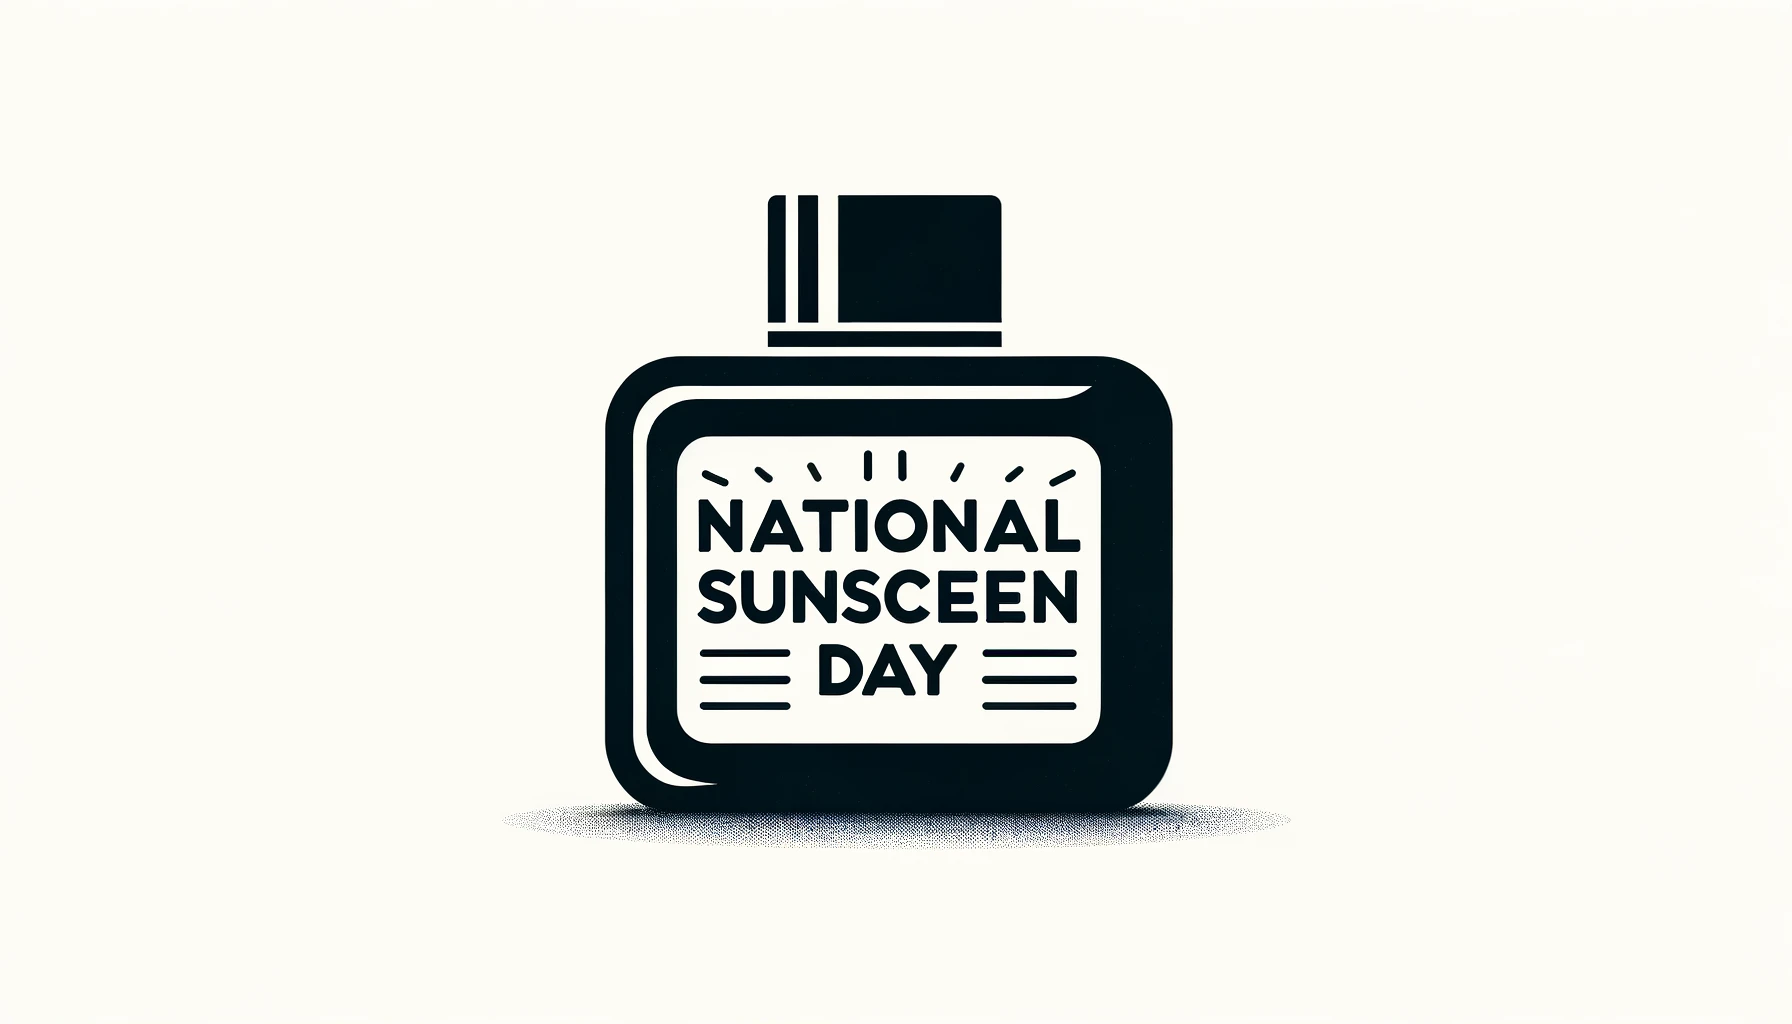 Heartfelt Sunscreen Day Wishes for Skincare Lovers